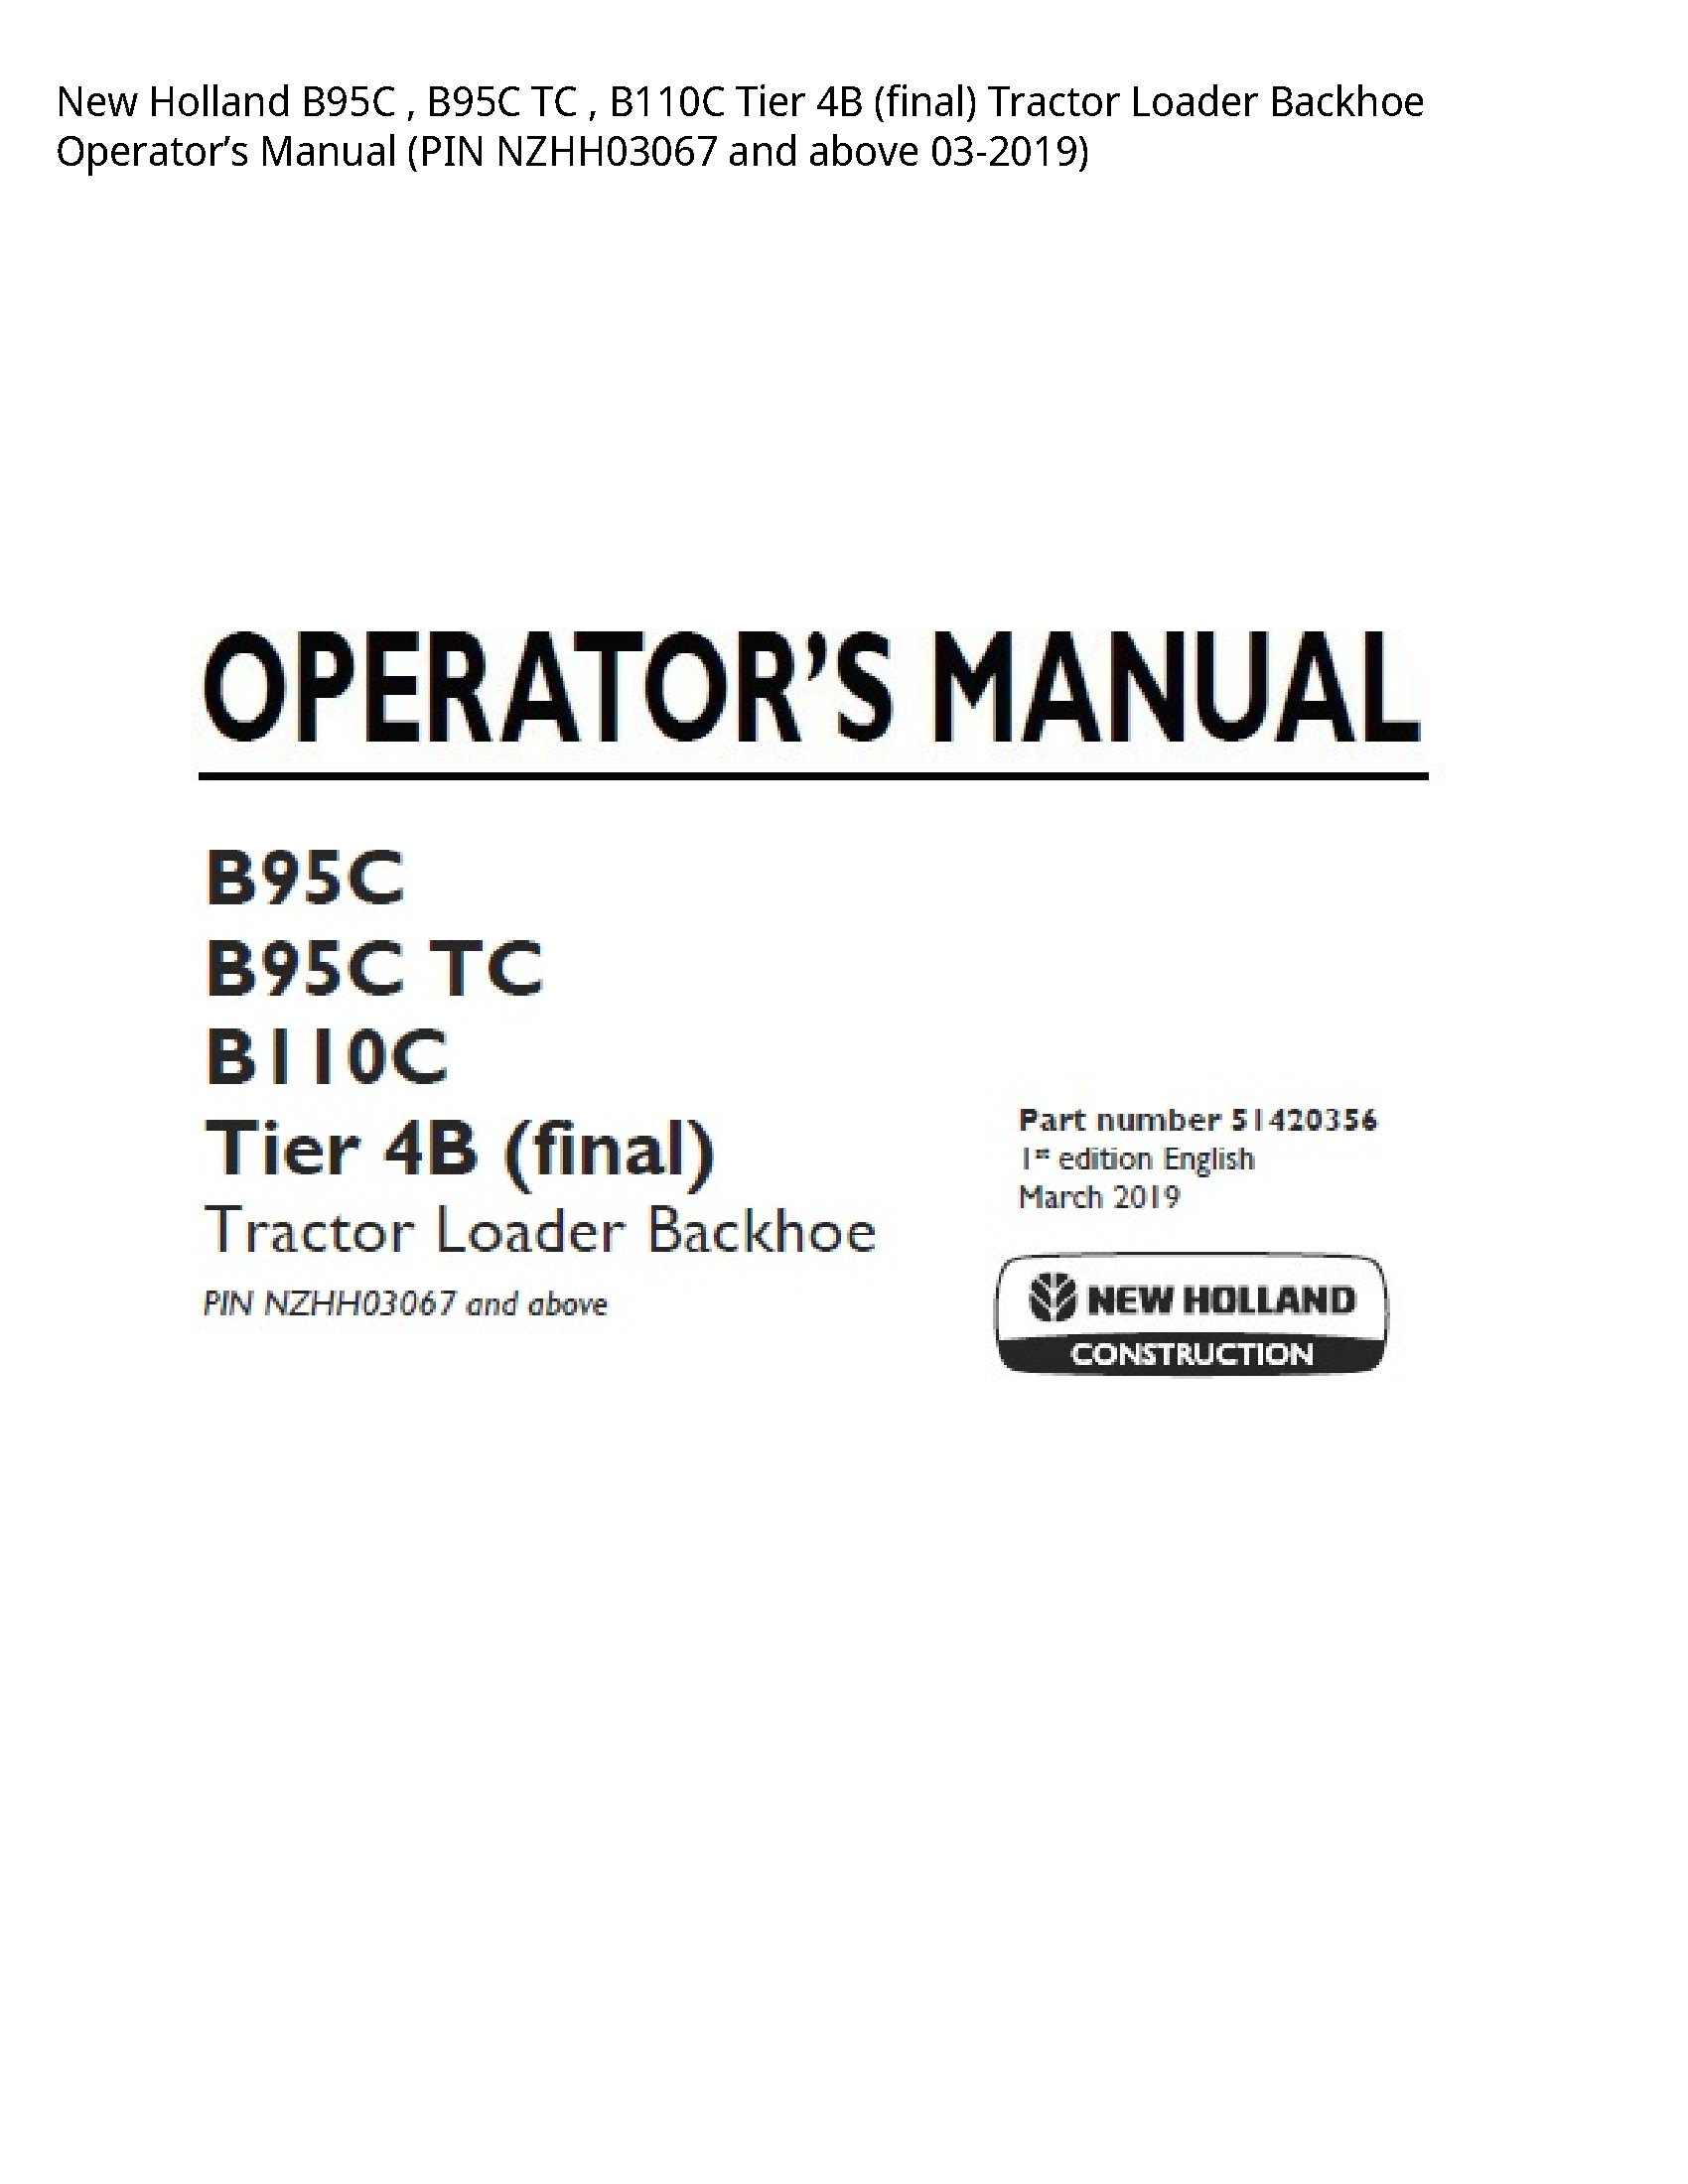 New Holland B95C TC Tier (final) Tractor Loader Backhoe Operator’s manual